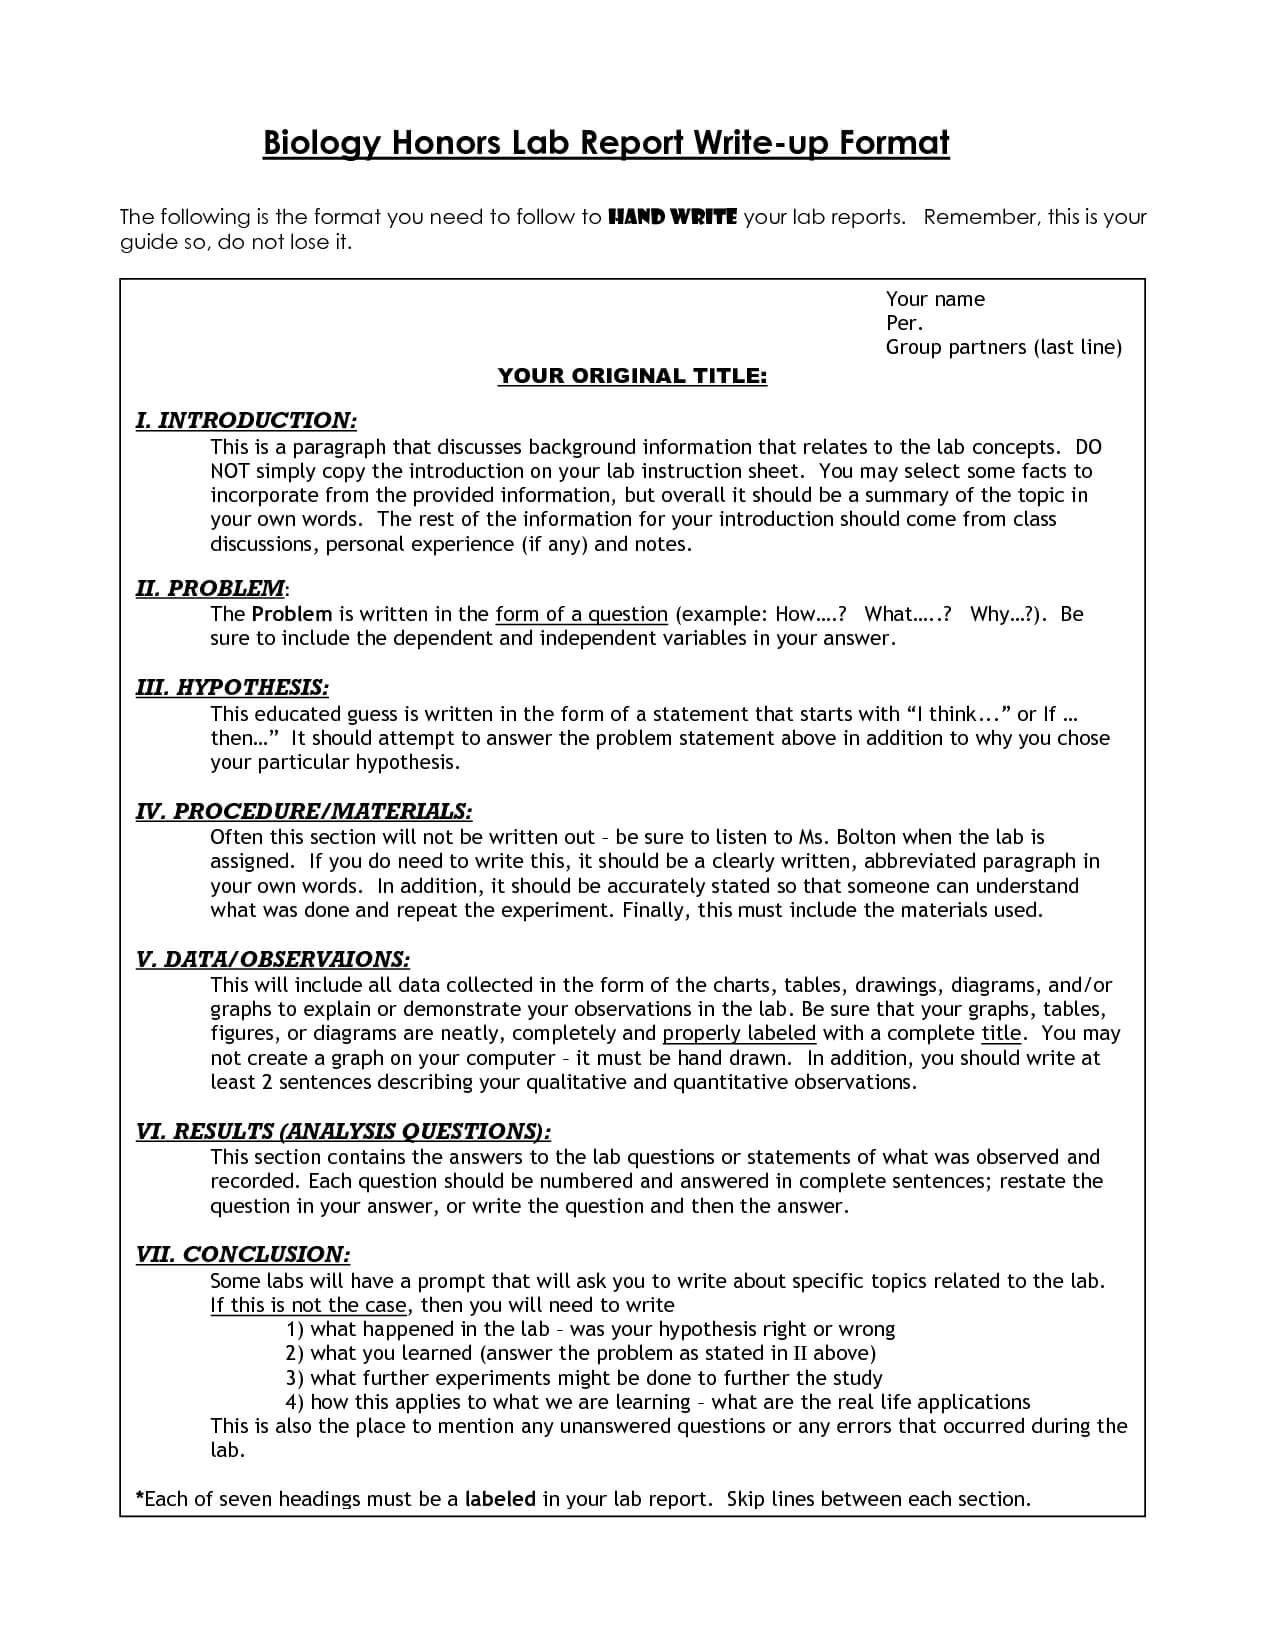 Biology Lab Report Format Example | College | Lab Report For Biology Lab Report Template